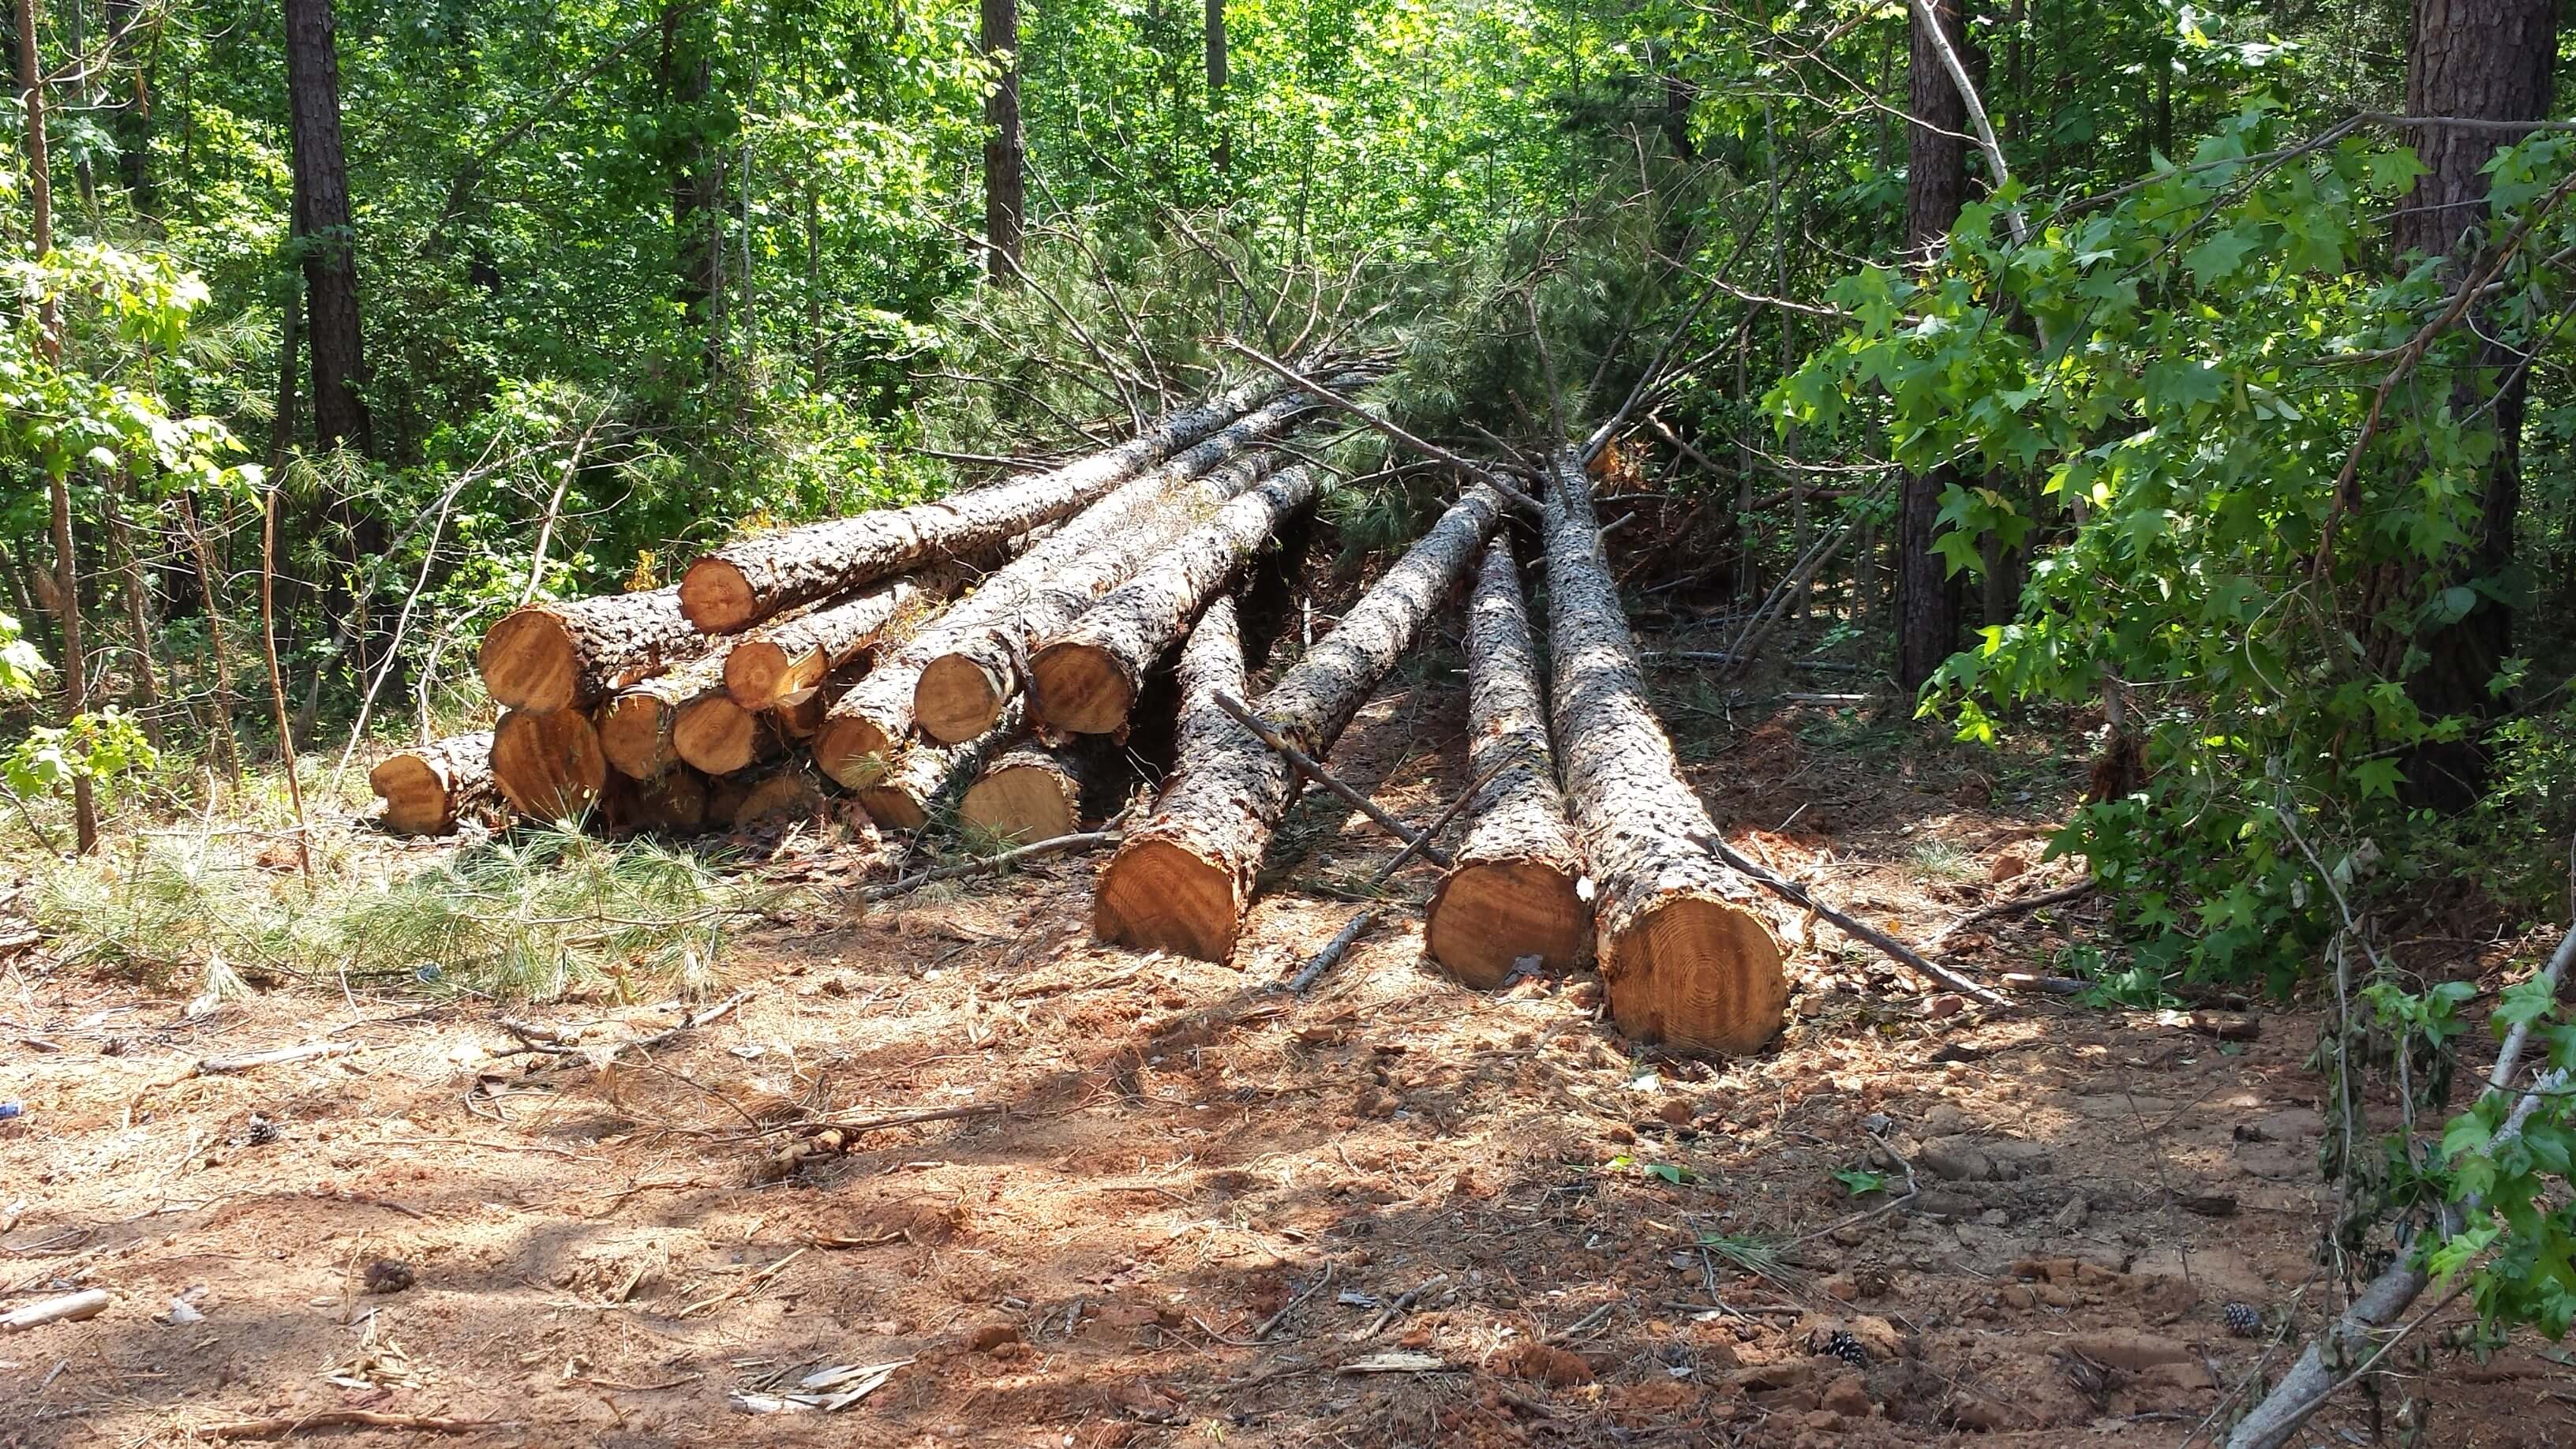 Sawlog Supply Tight in US South with Long-Term Opportunities Ahead